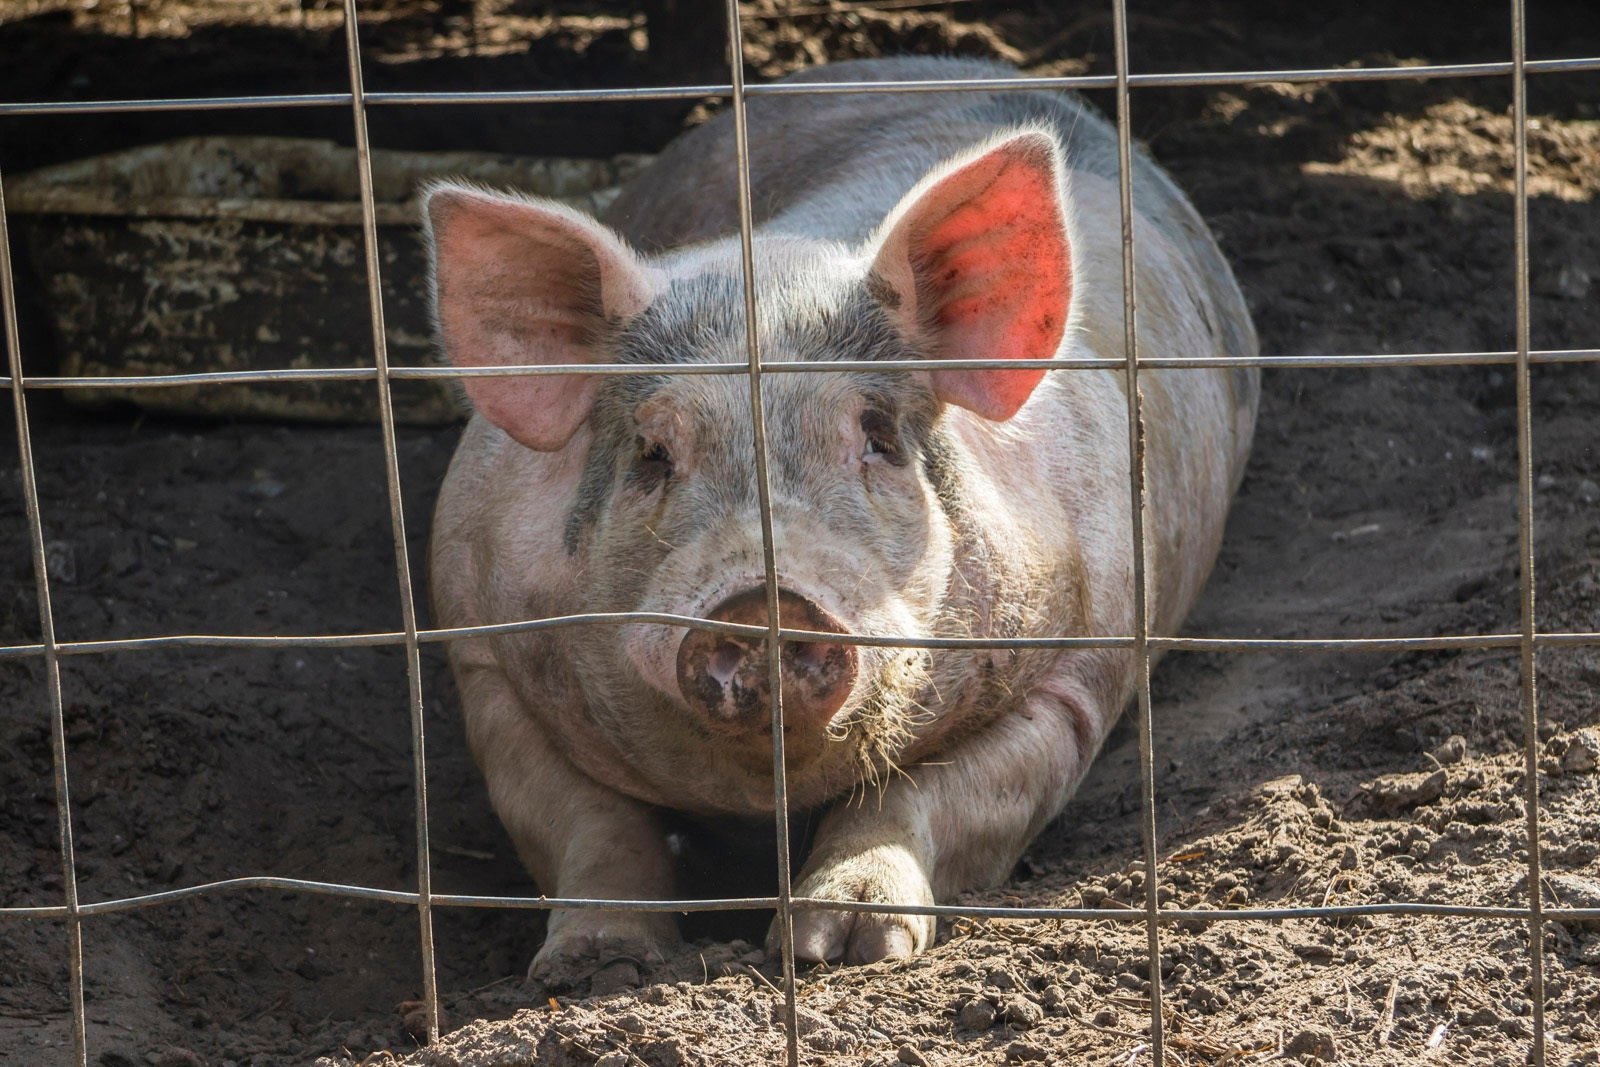 Pig behind a cage on the property